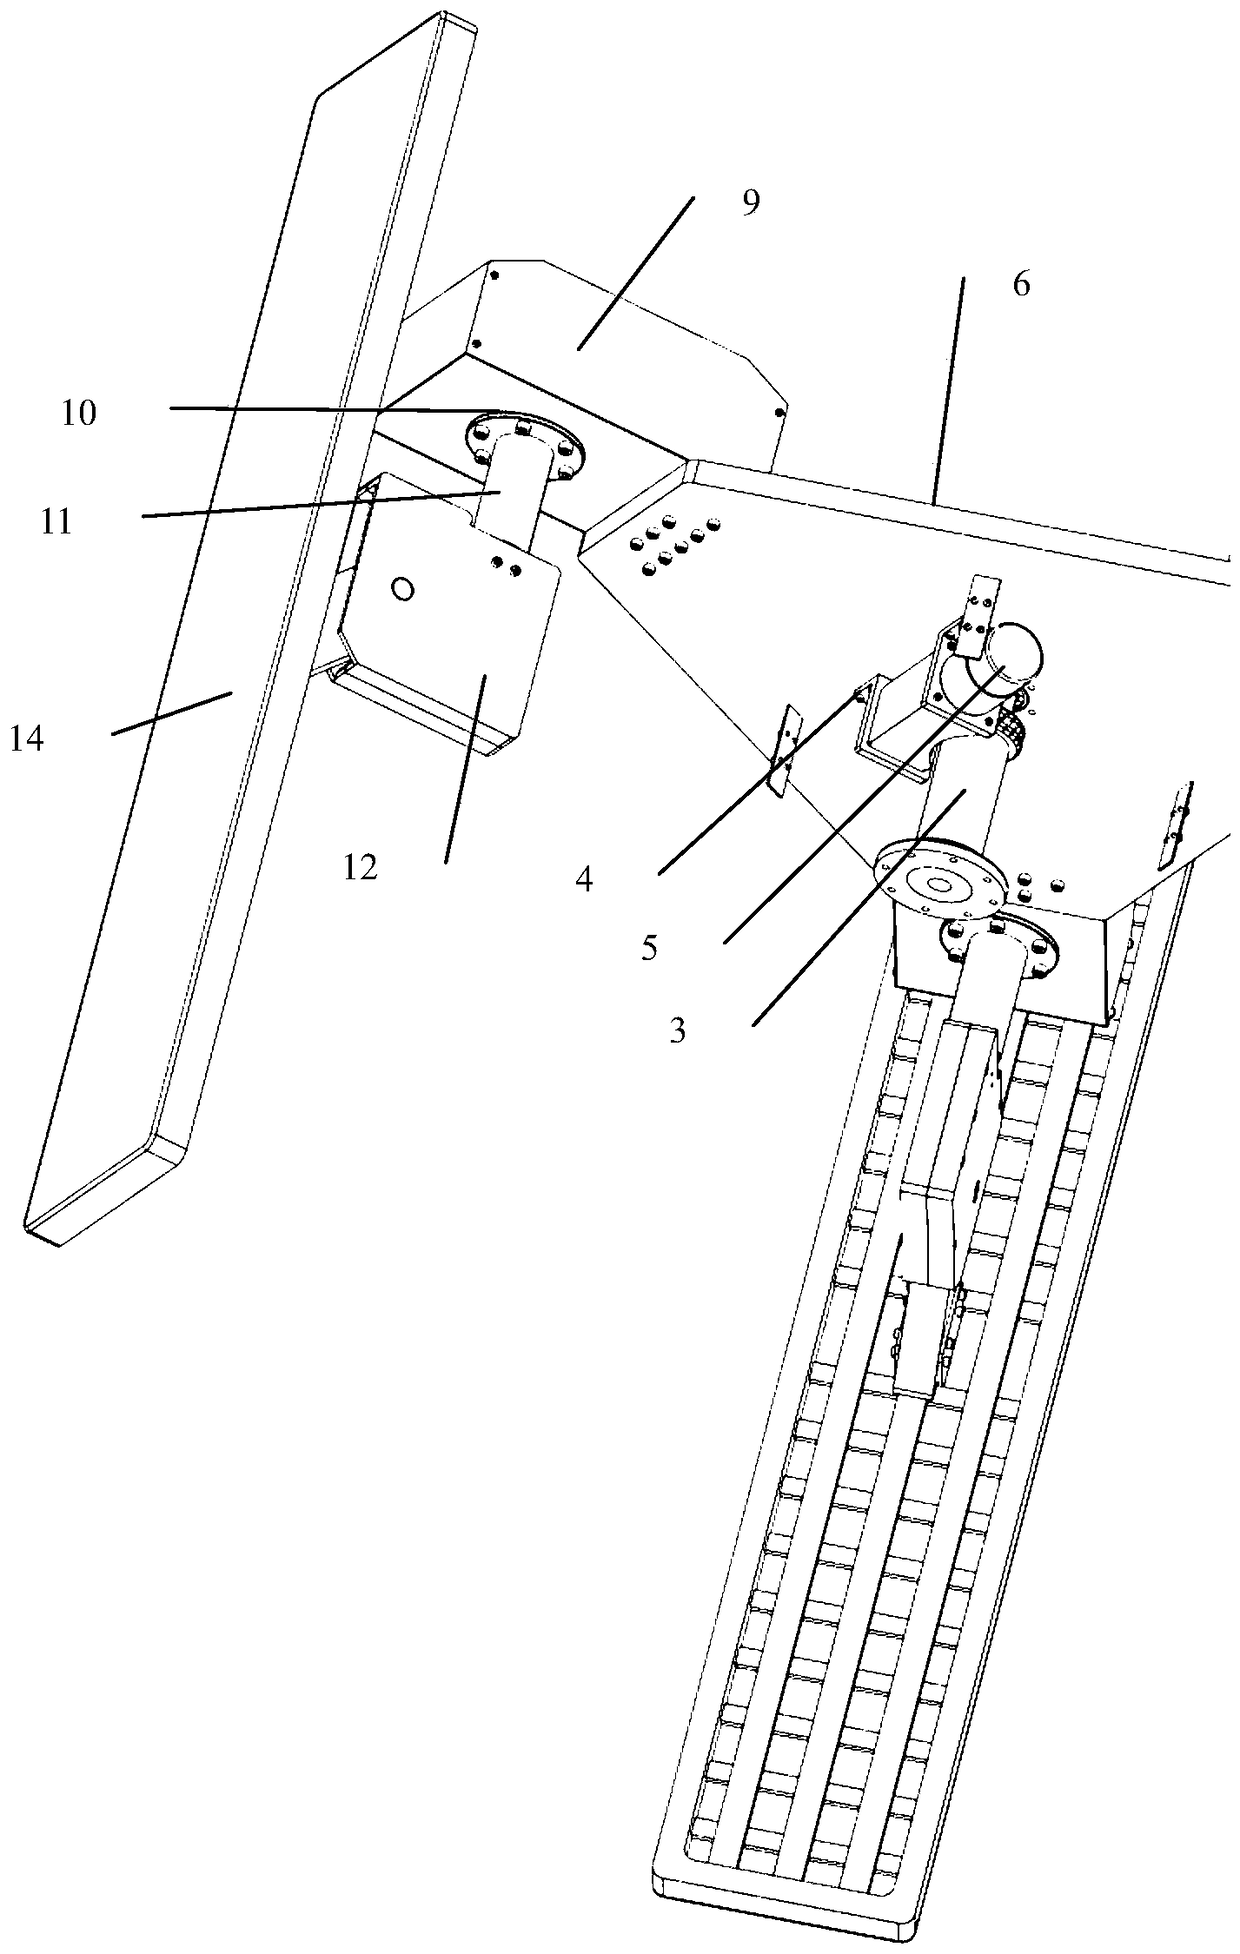 A Supporting Mechanism for Multi-Surface Directional Antenna with Adjustable Angle